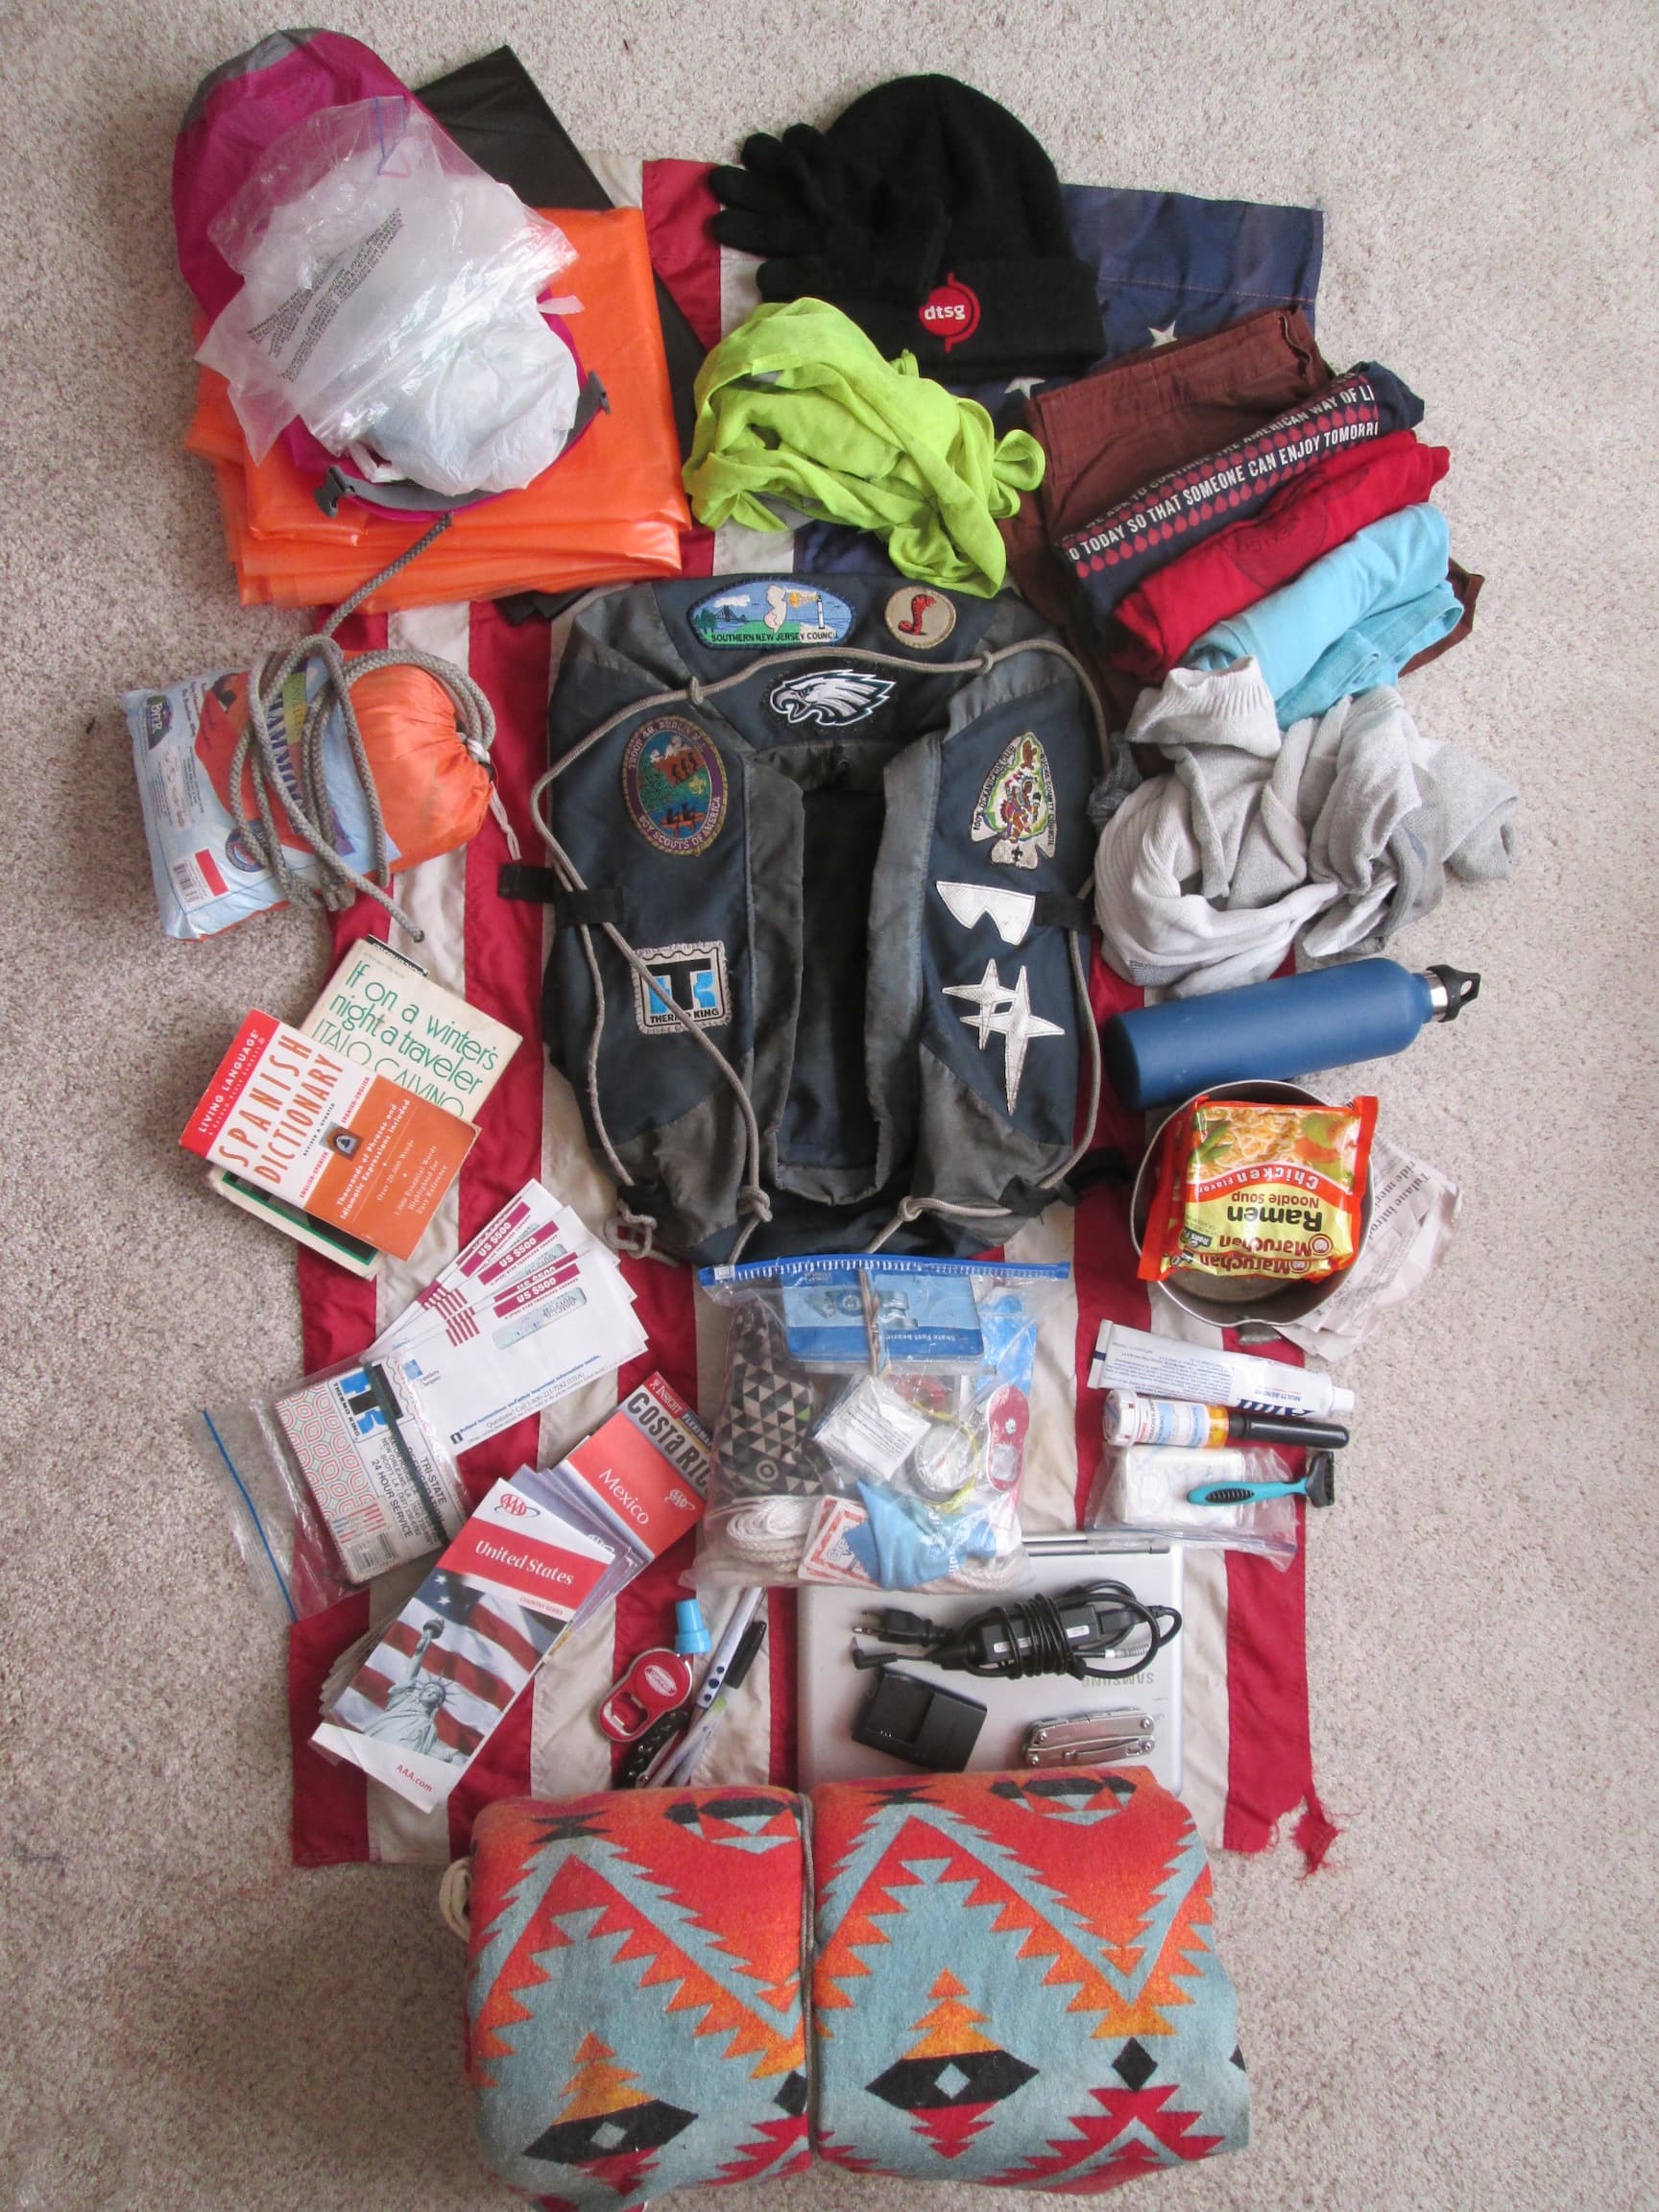 My backpack and contents laid out before the trip